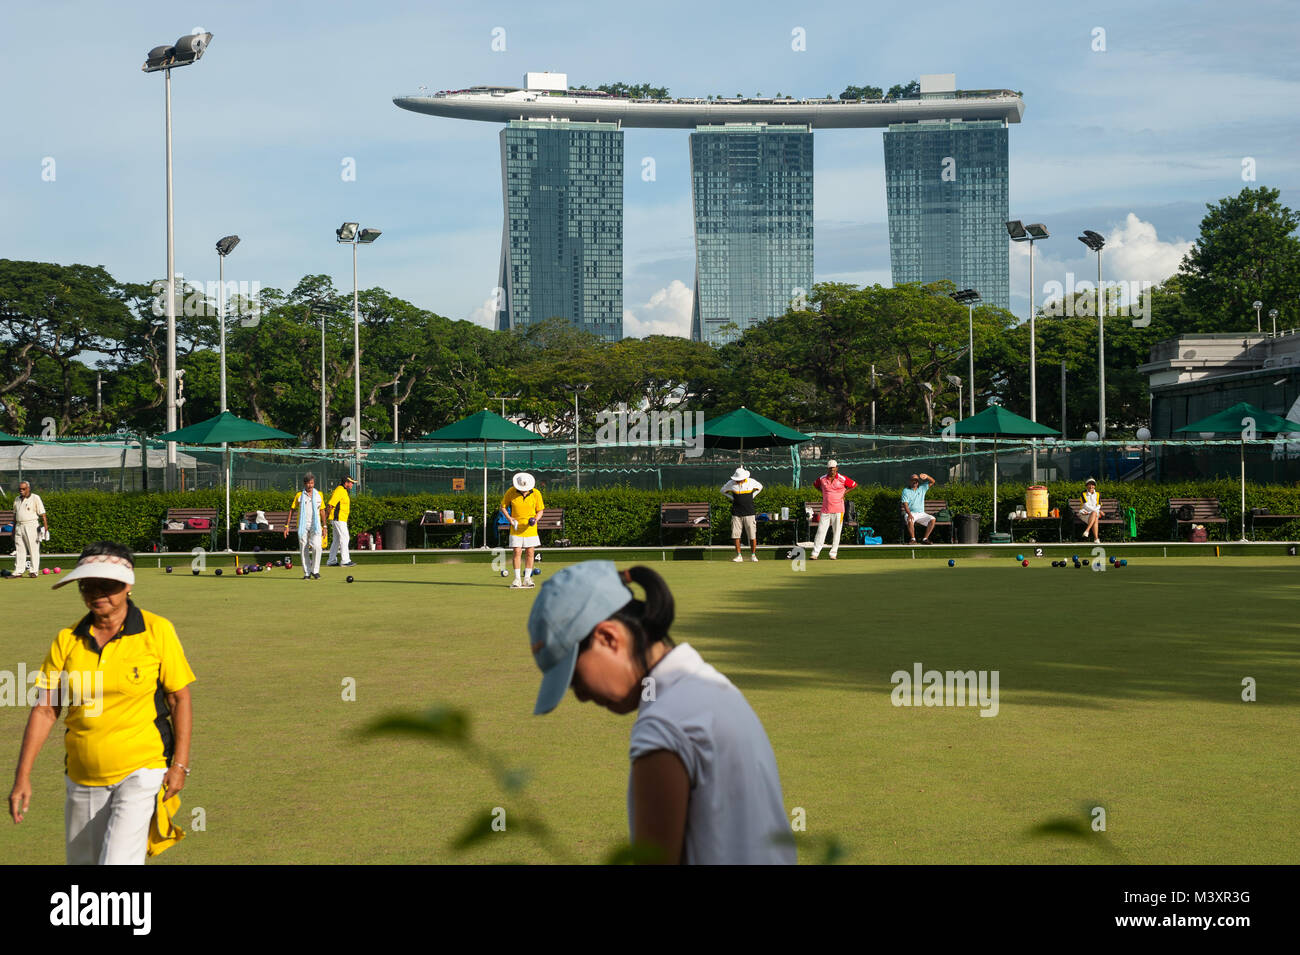 04.11.2017, Singapore, Republic of Singapore, Asia - People are lawn bowling next to the Singapore Cricket Club with the Marina Bay Sands Hotel. Stock Photo